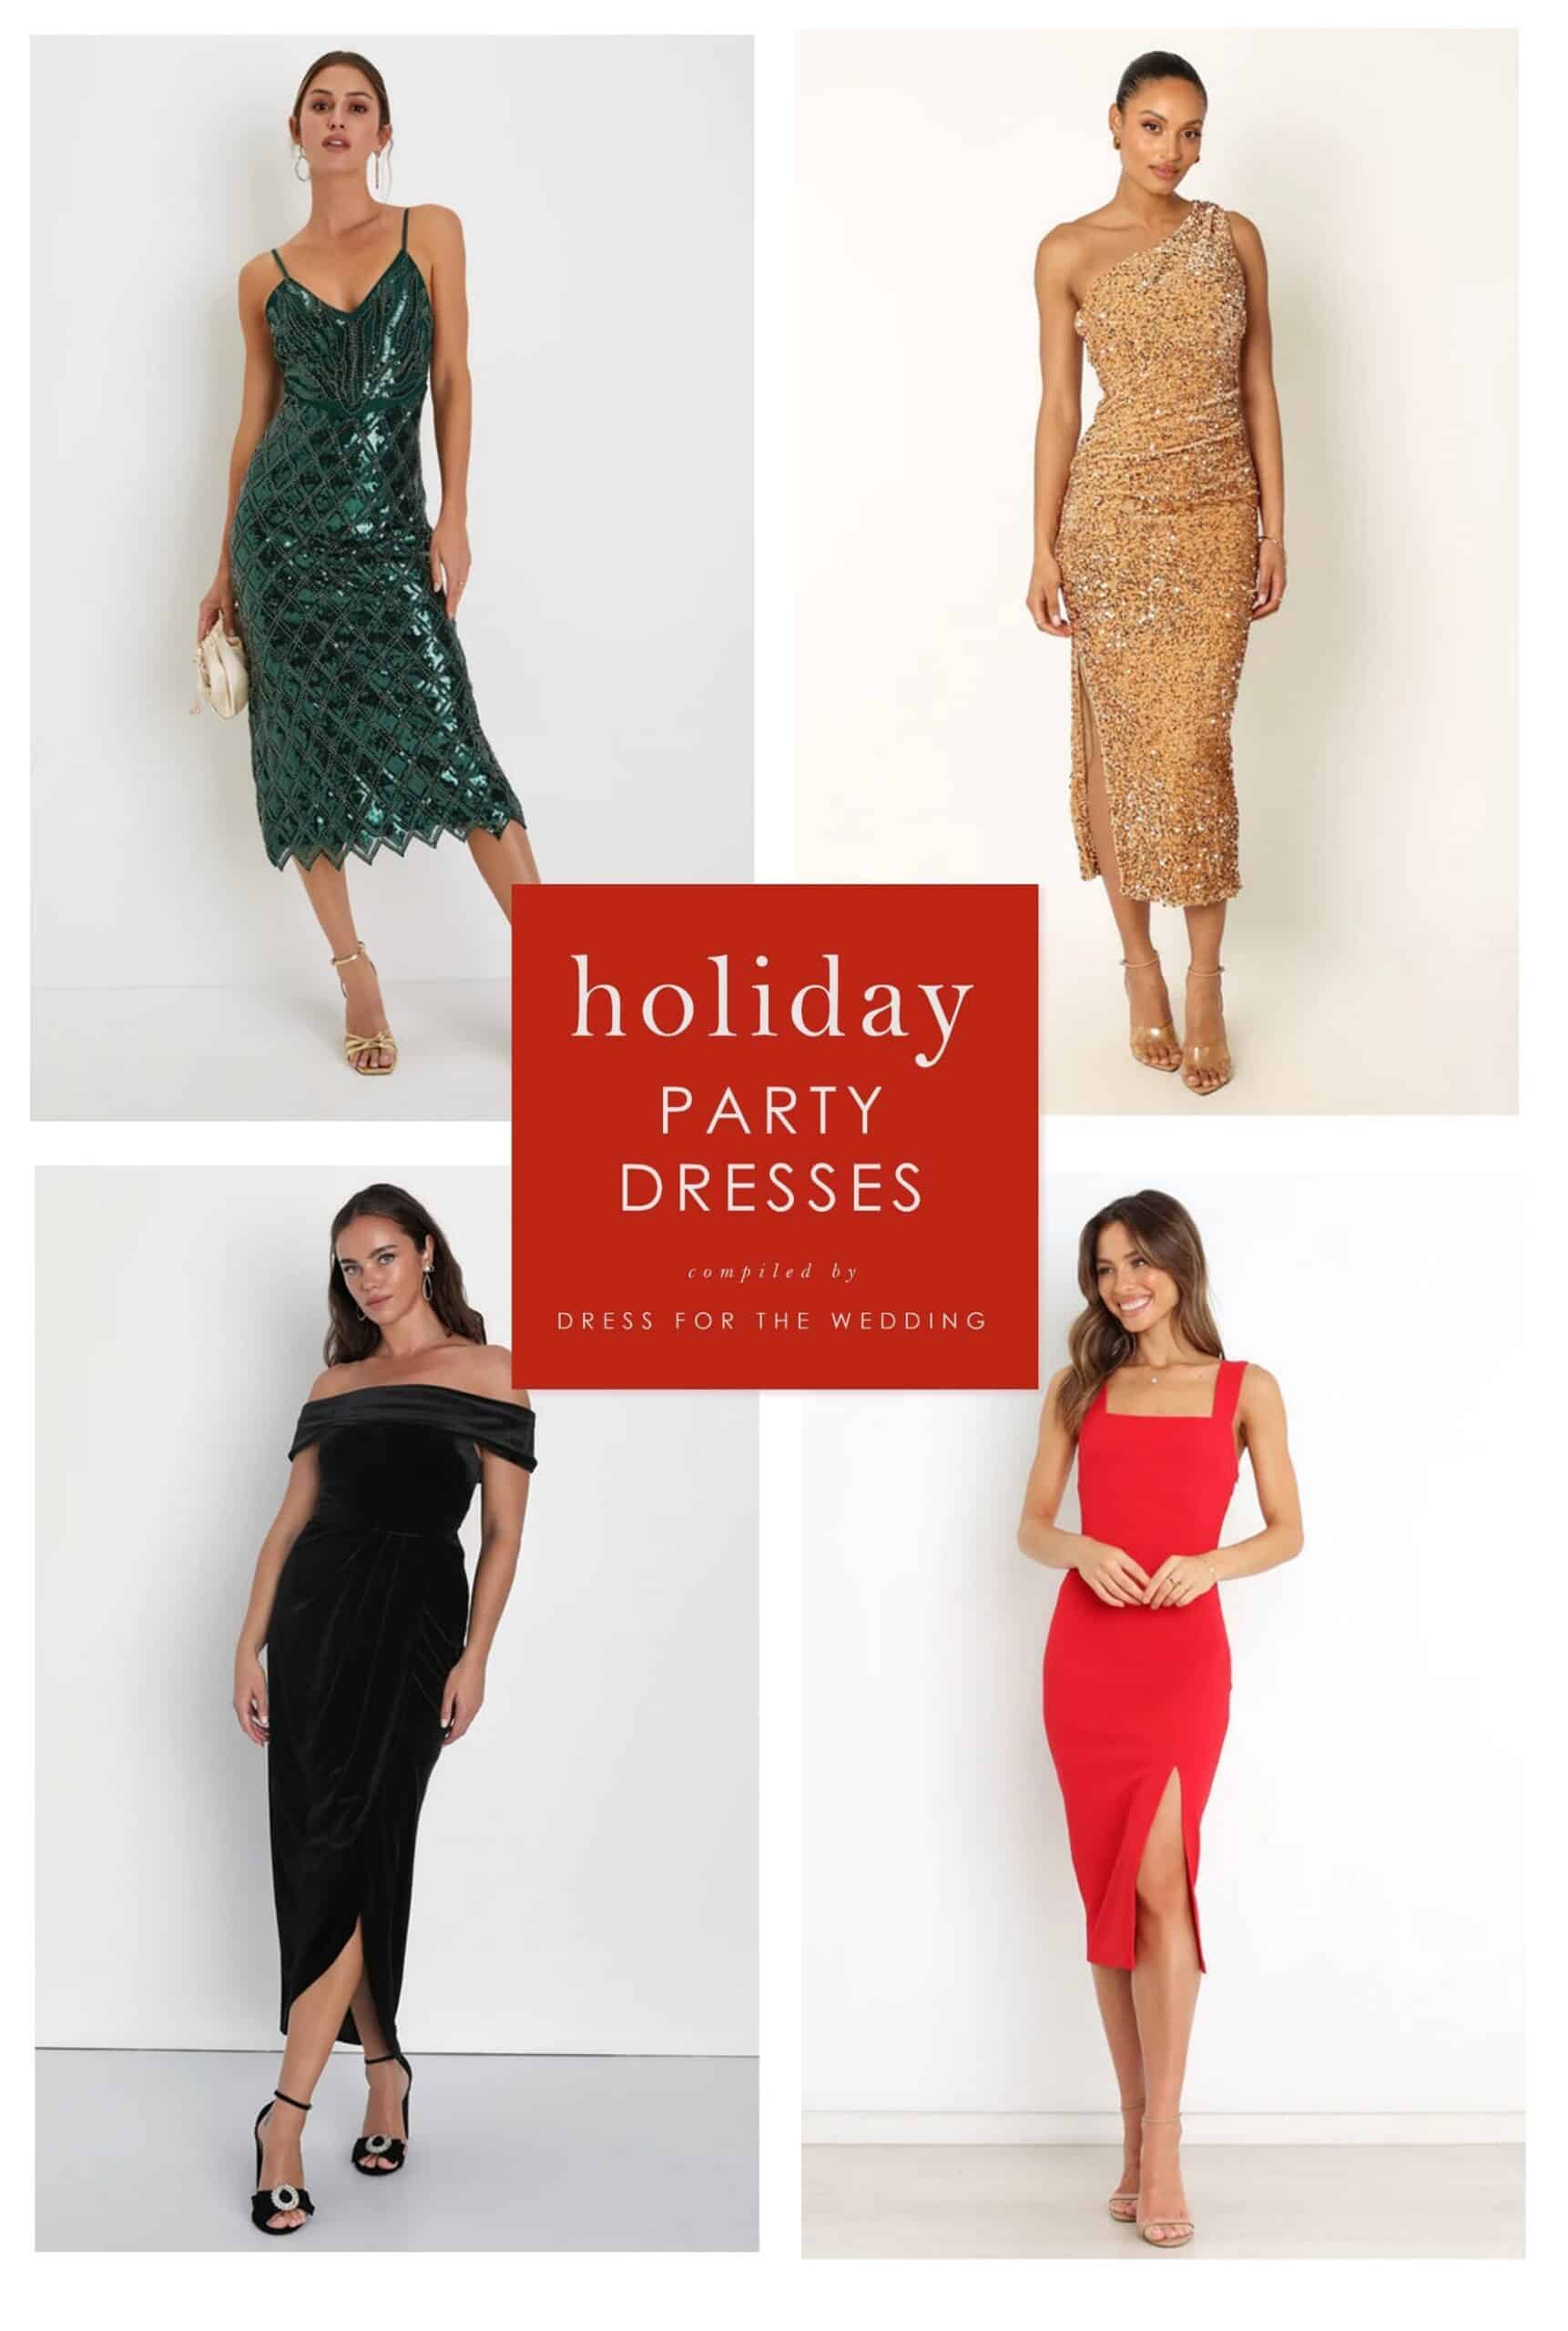 Shop for Holiday Party Dresses at These 11 Stores